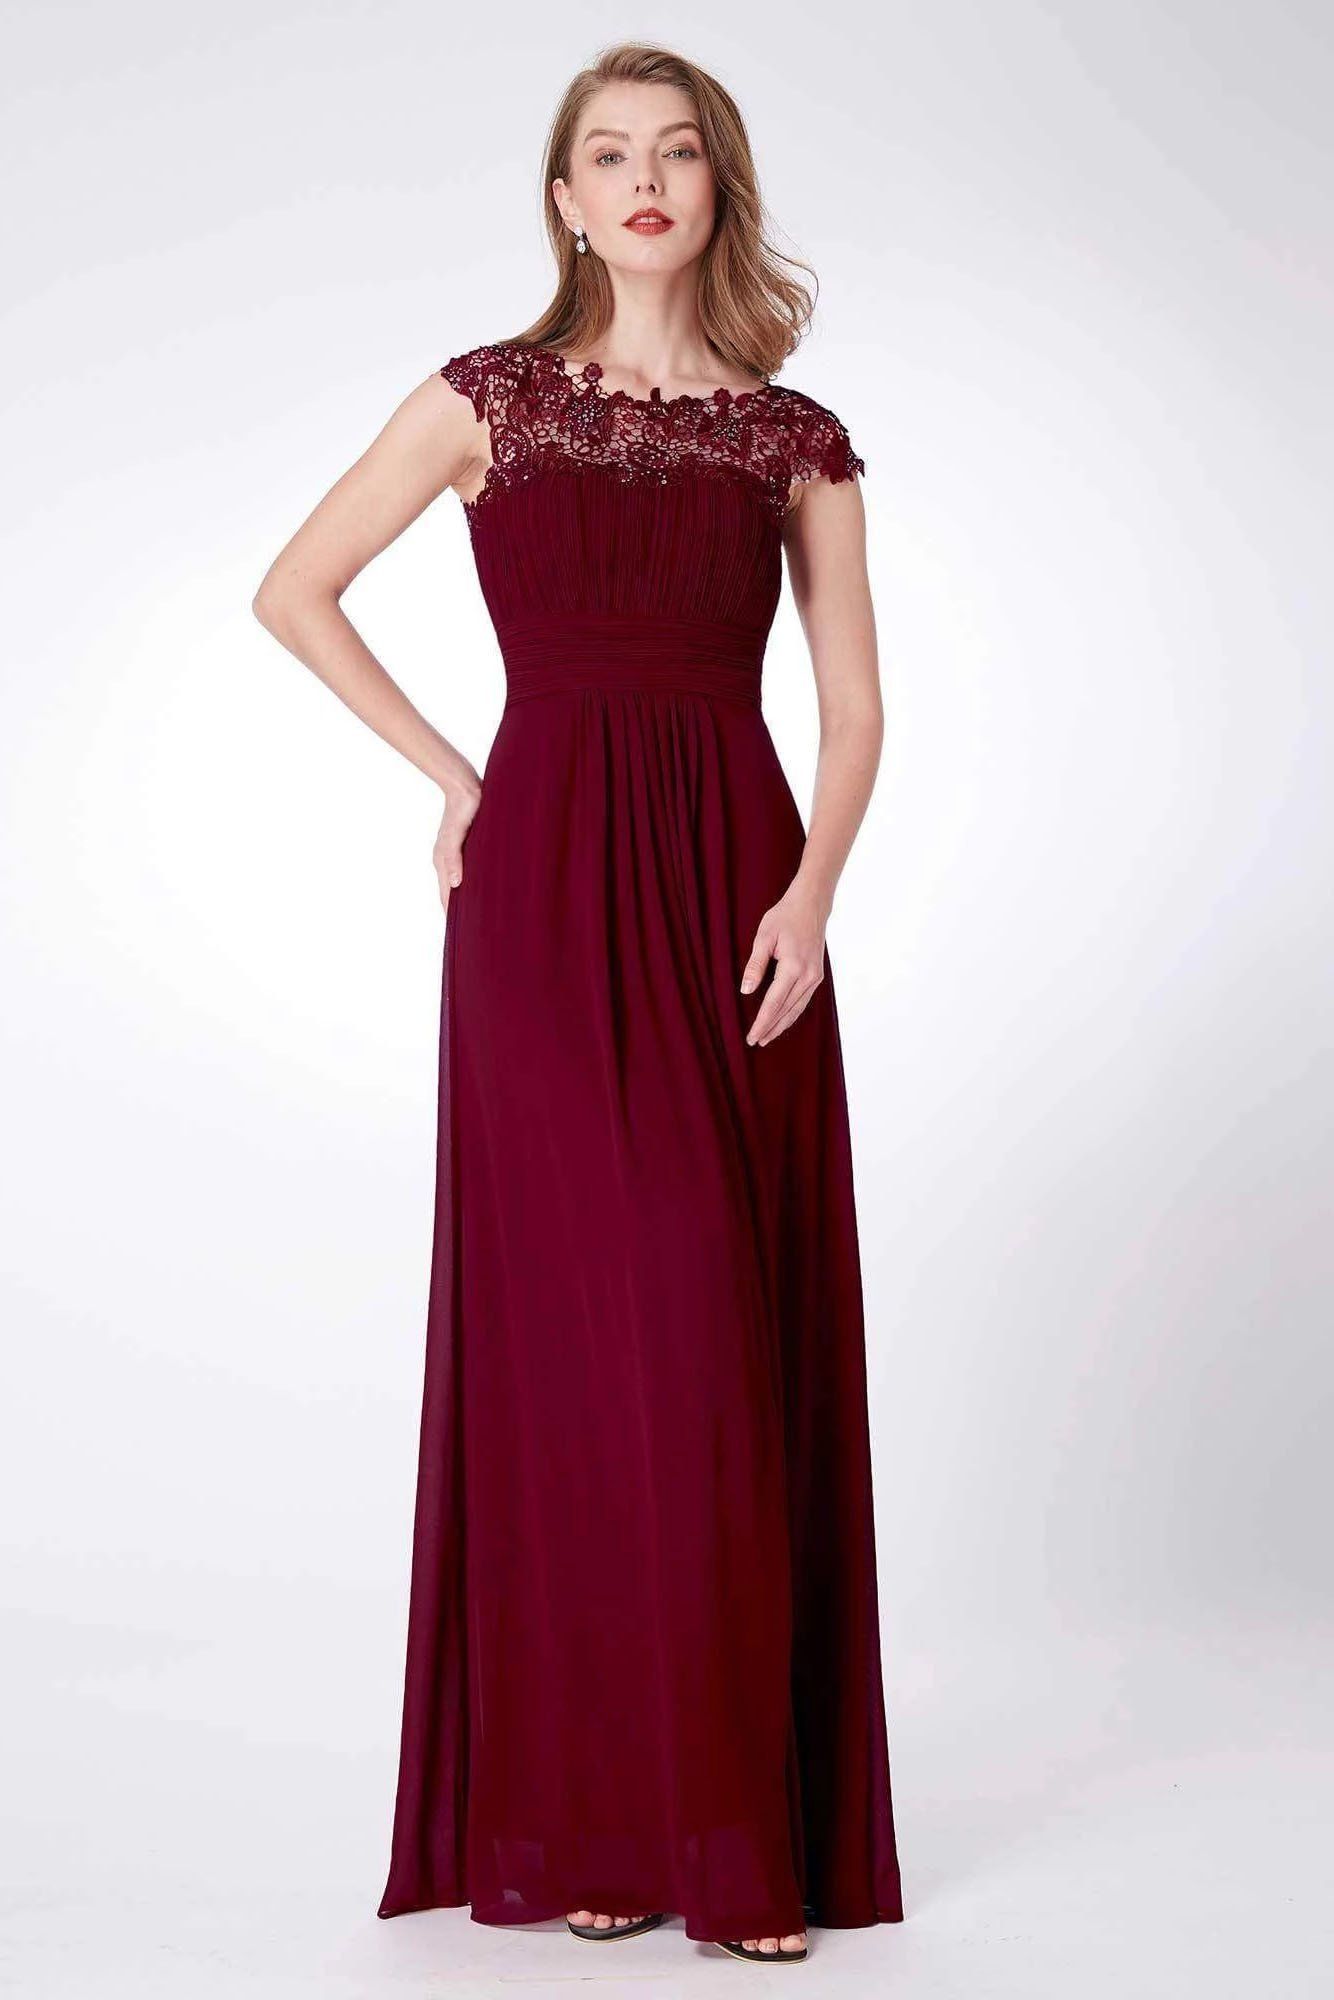 Burgundy Formal Dresses With Sleeves 2021